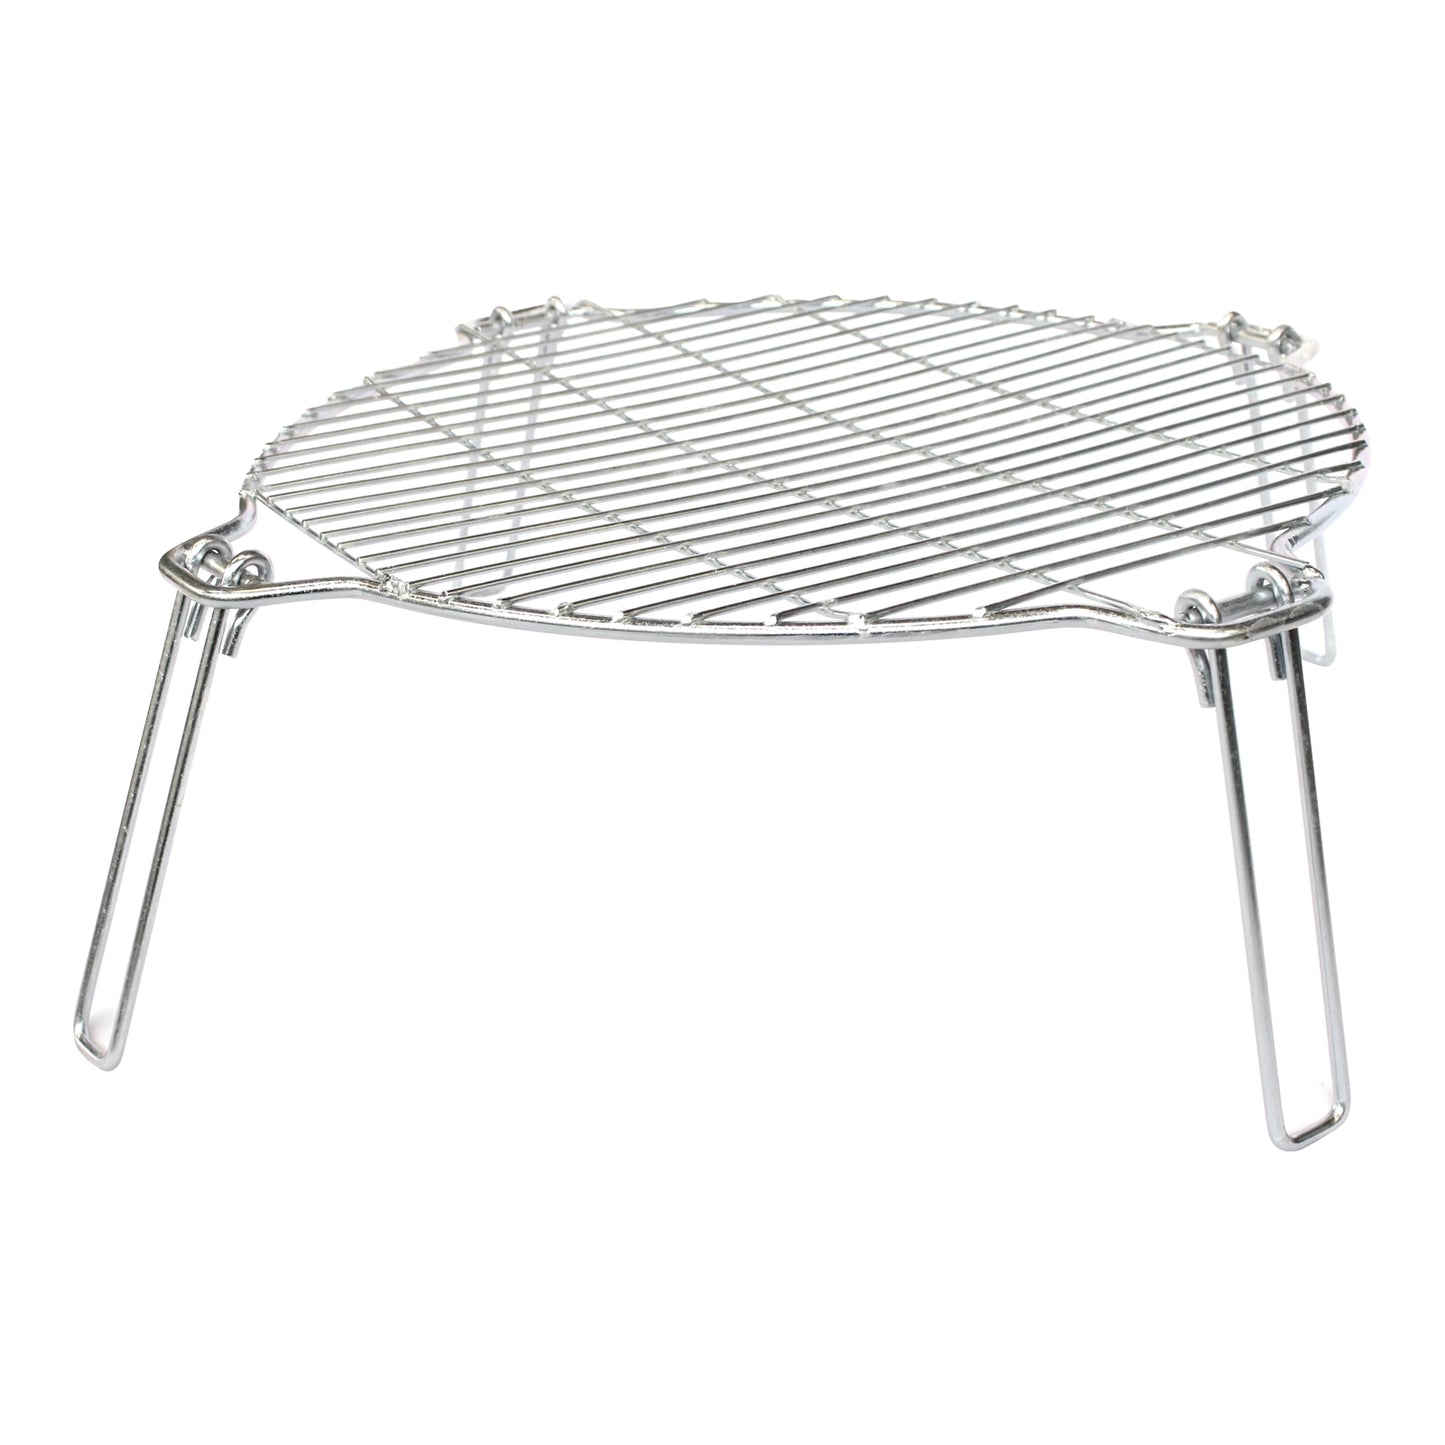 Outdoor Cooking Stand with Collapsible Legs